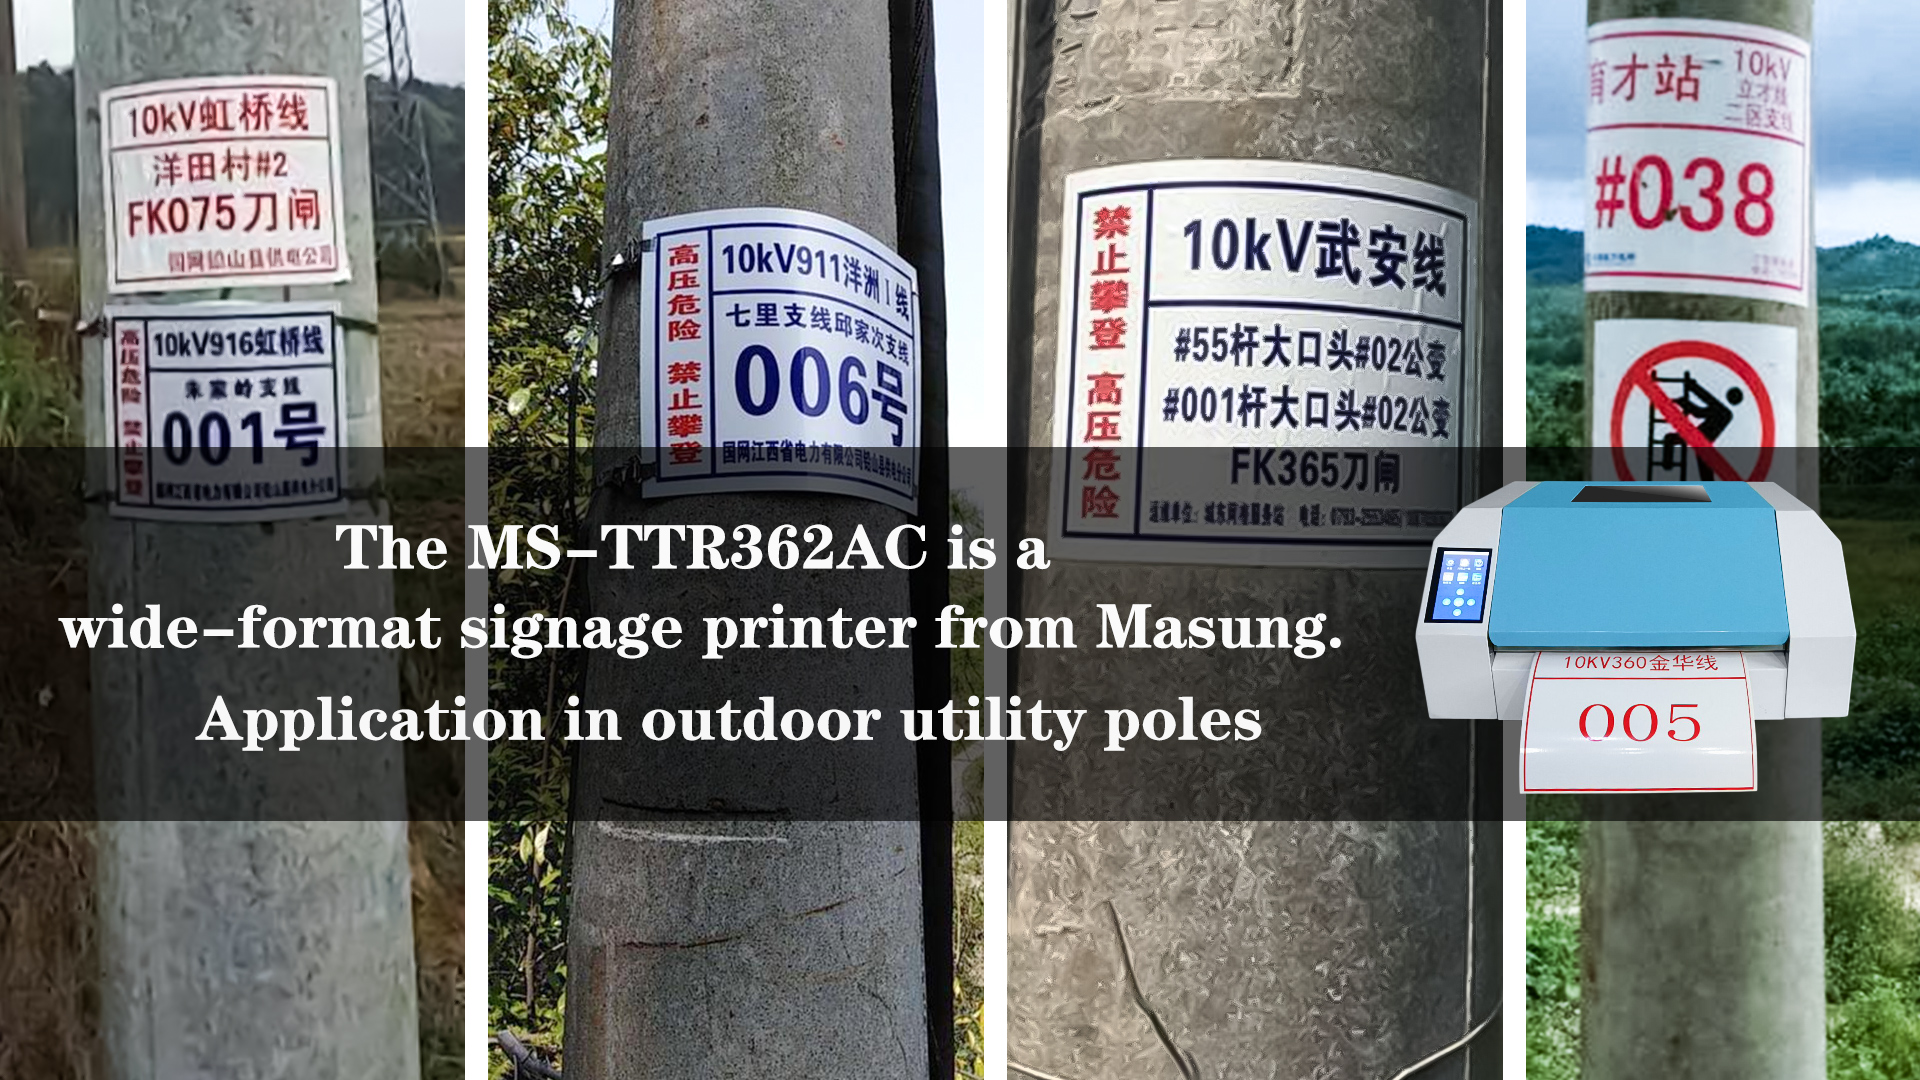 Application of Masung Wide-Format Signage Printer MS-TTR362AC on Outdoor Utility Poles